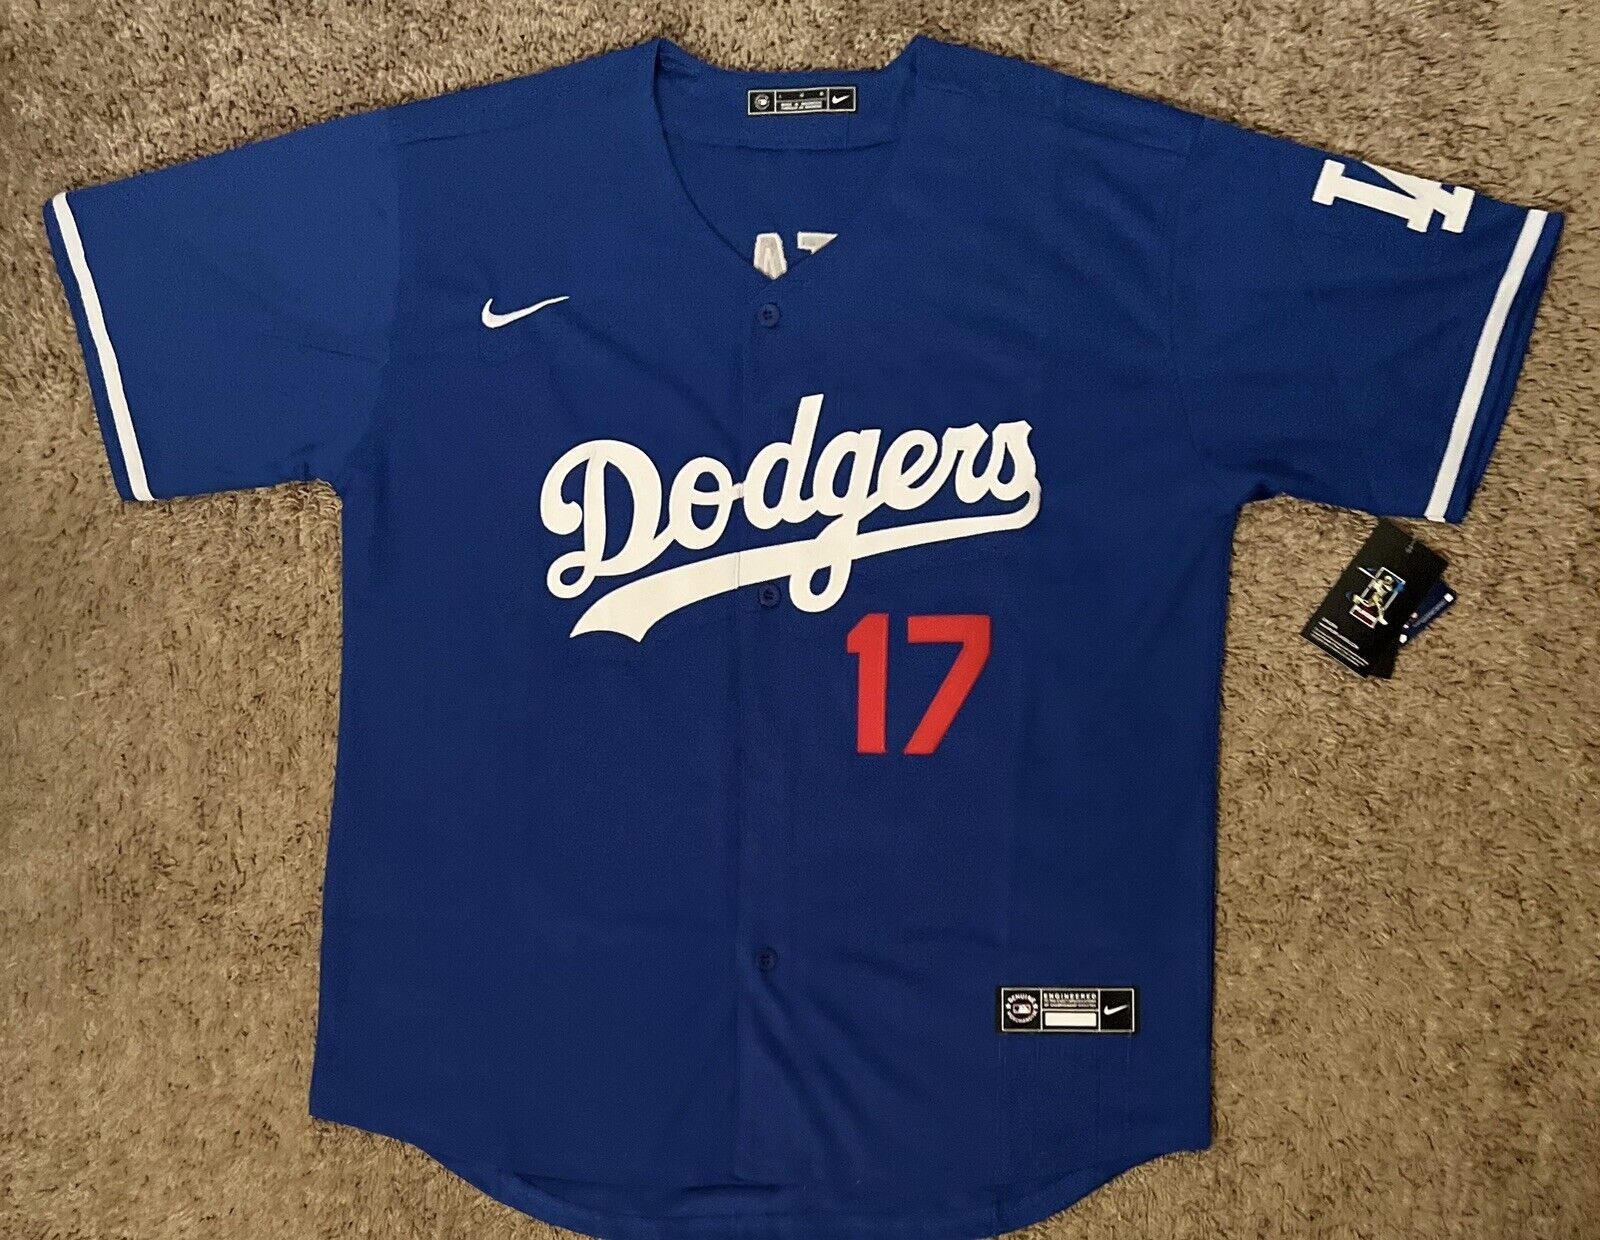 Shohei Ohtani #17 Los Angeles Dodgers Blue Jersey Men’s Large Stitched New